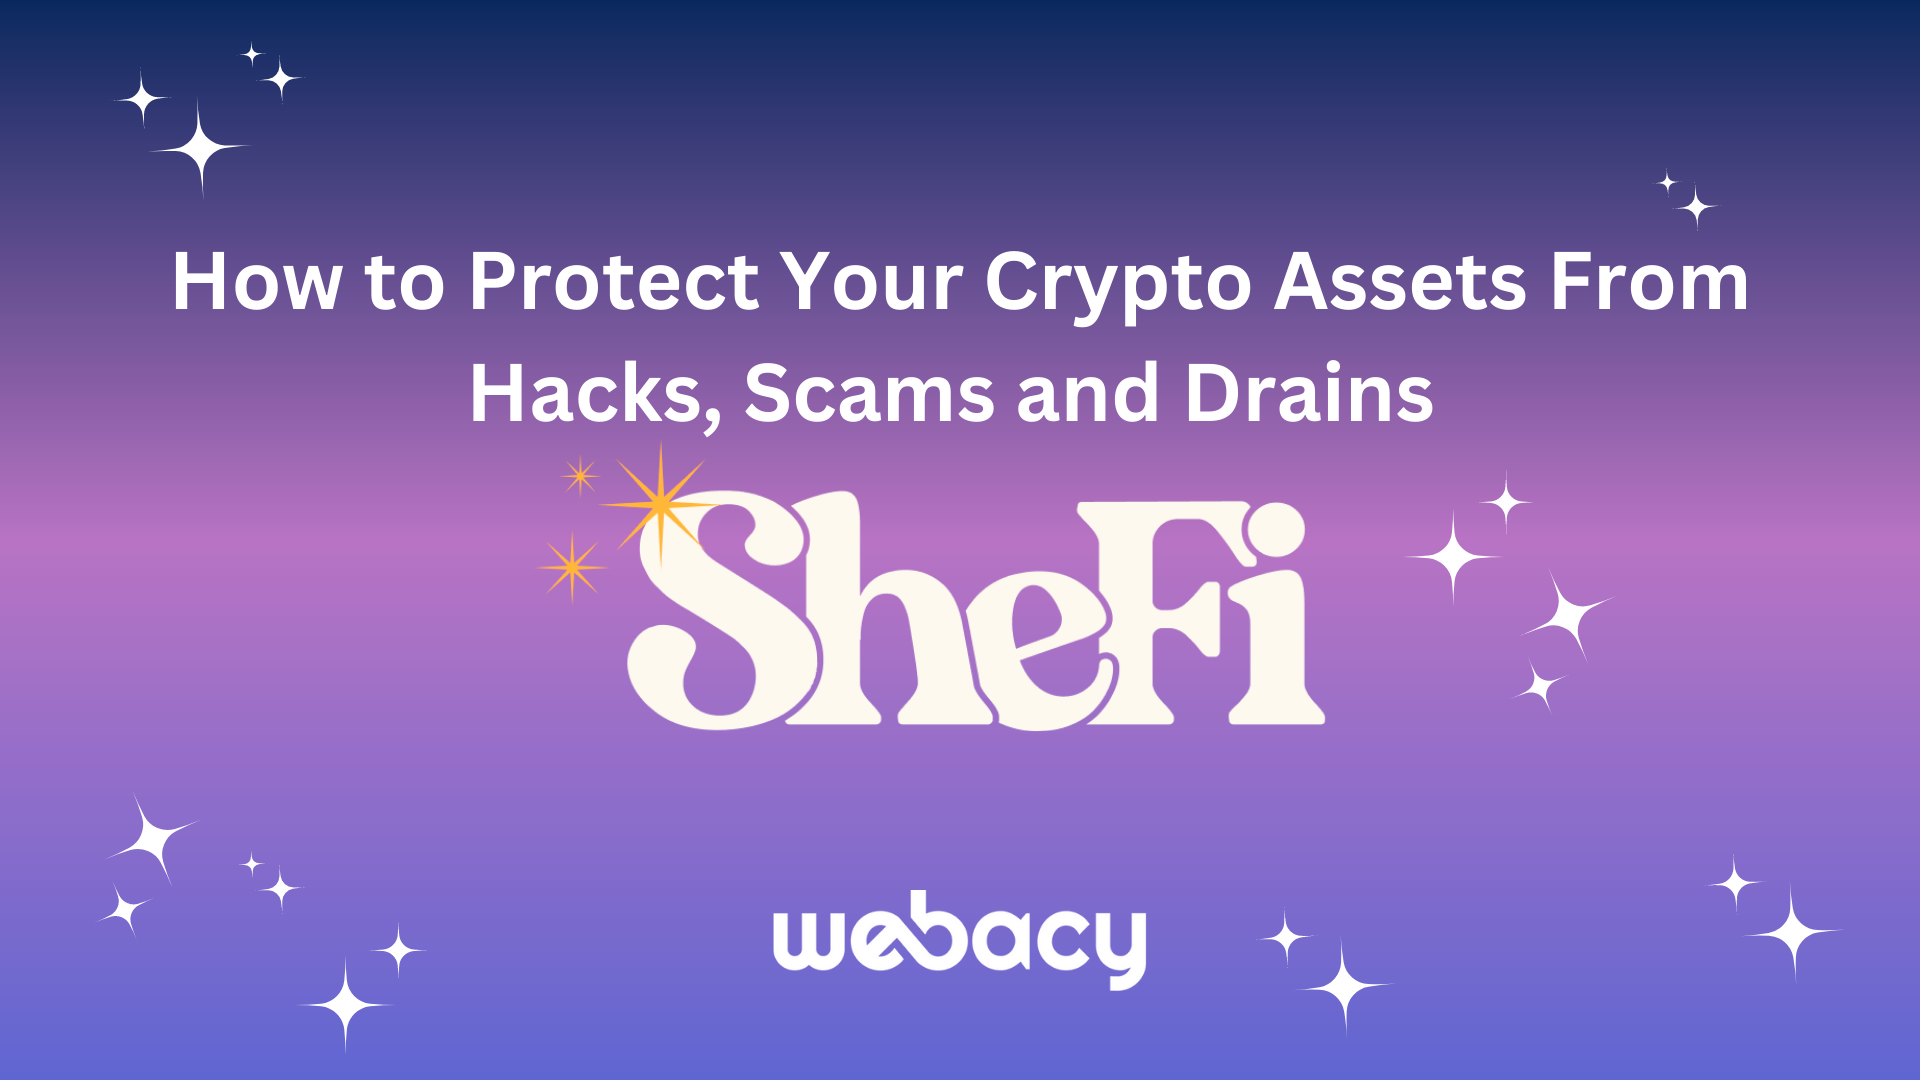 Webacy Joins Quantstamp and Harpie on SheFi Security Panel: How to Protect Your Crypto Assets from Hacks, Scams and Drains